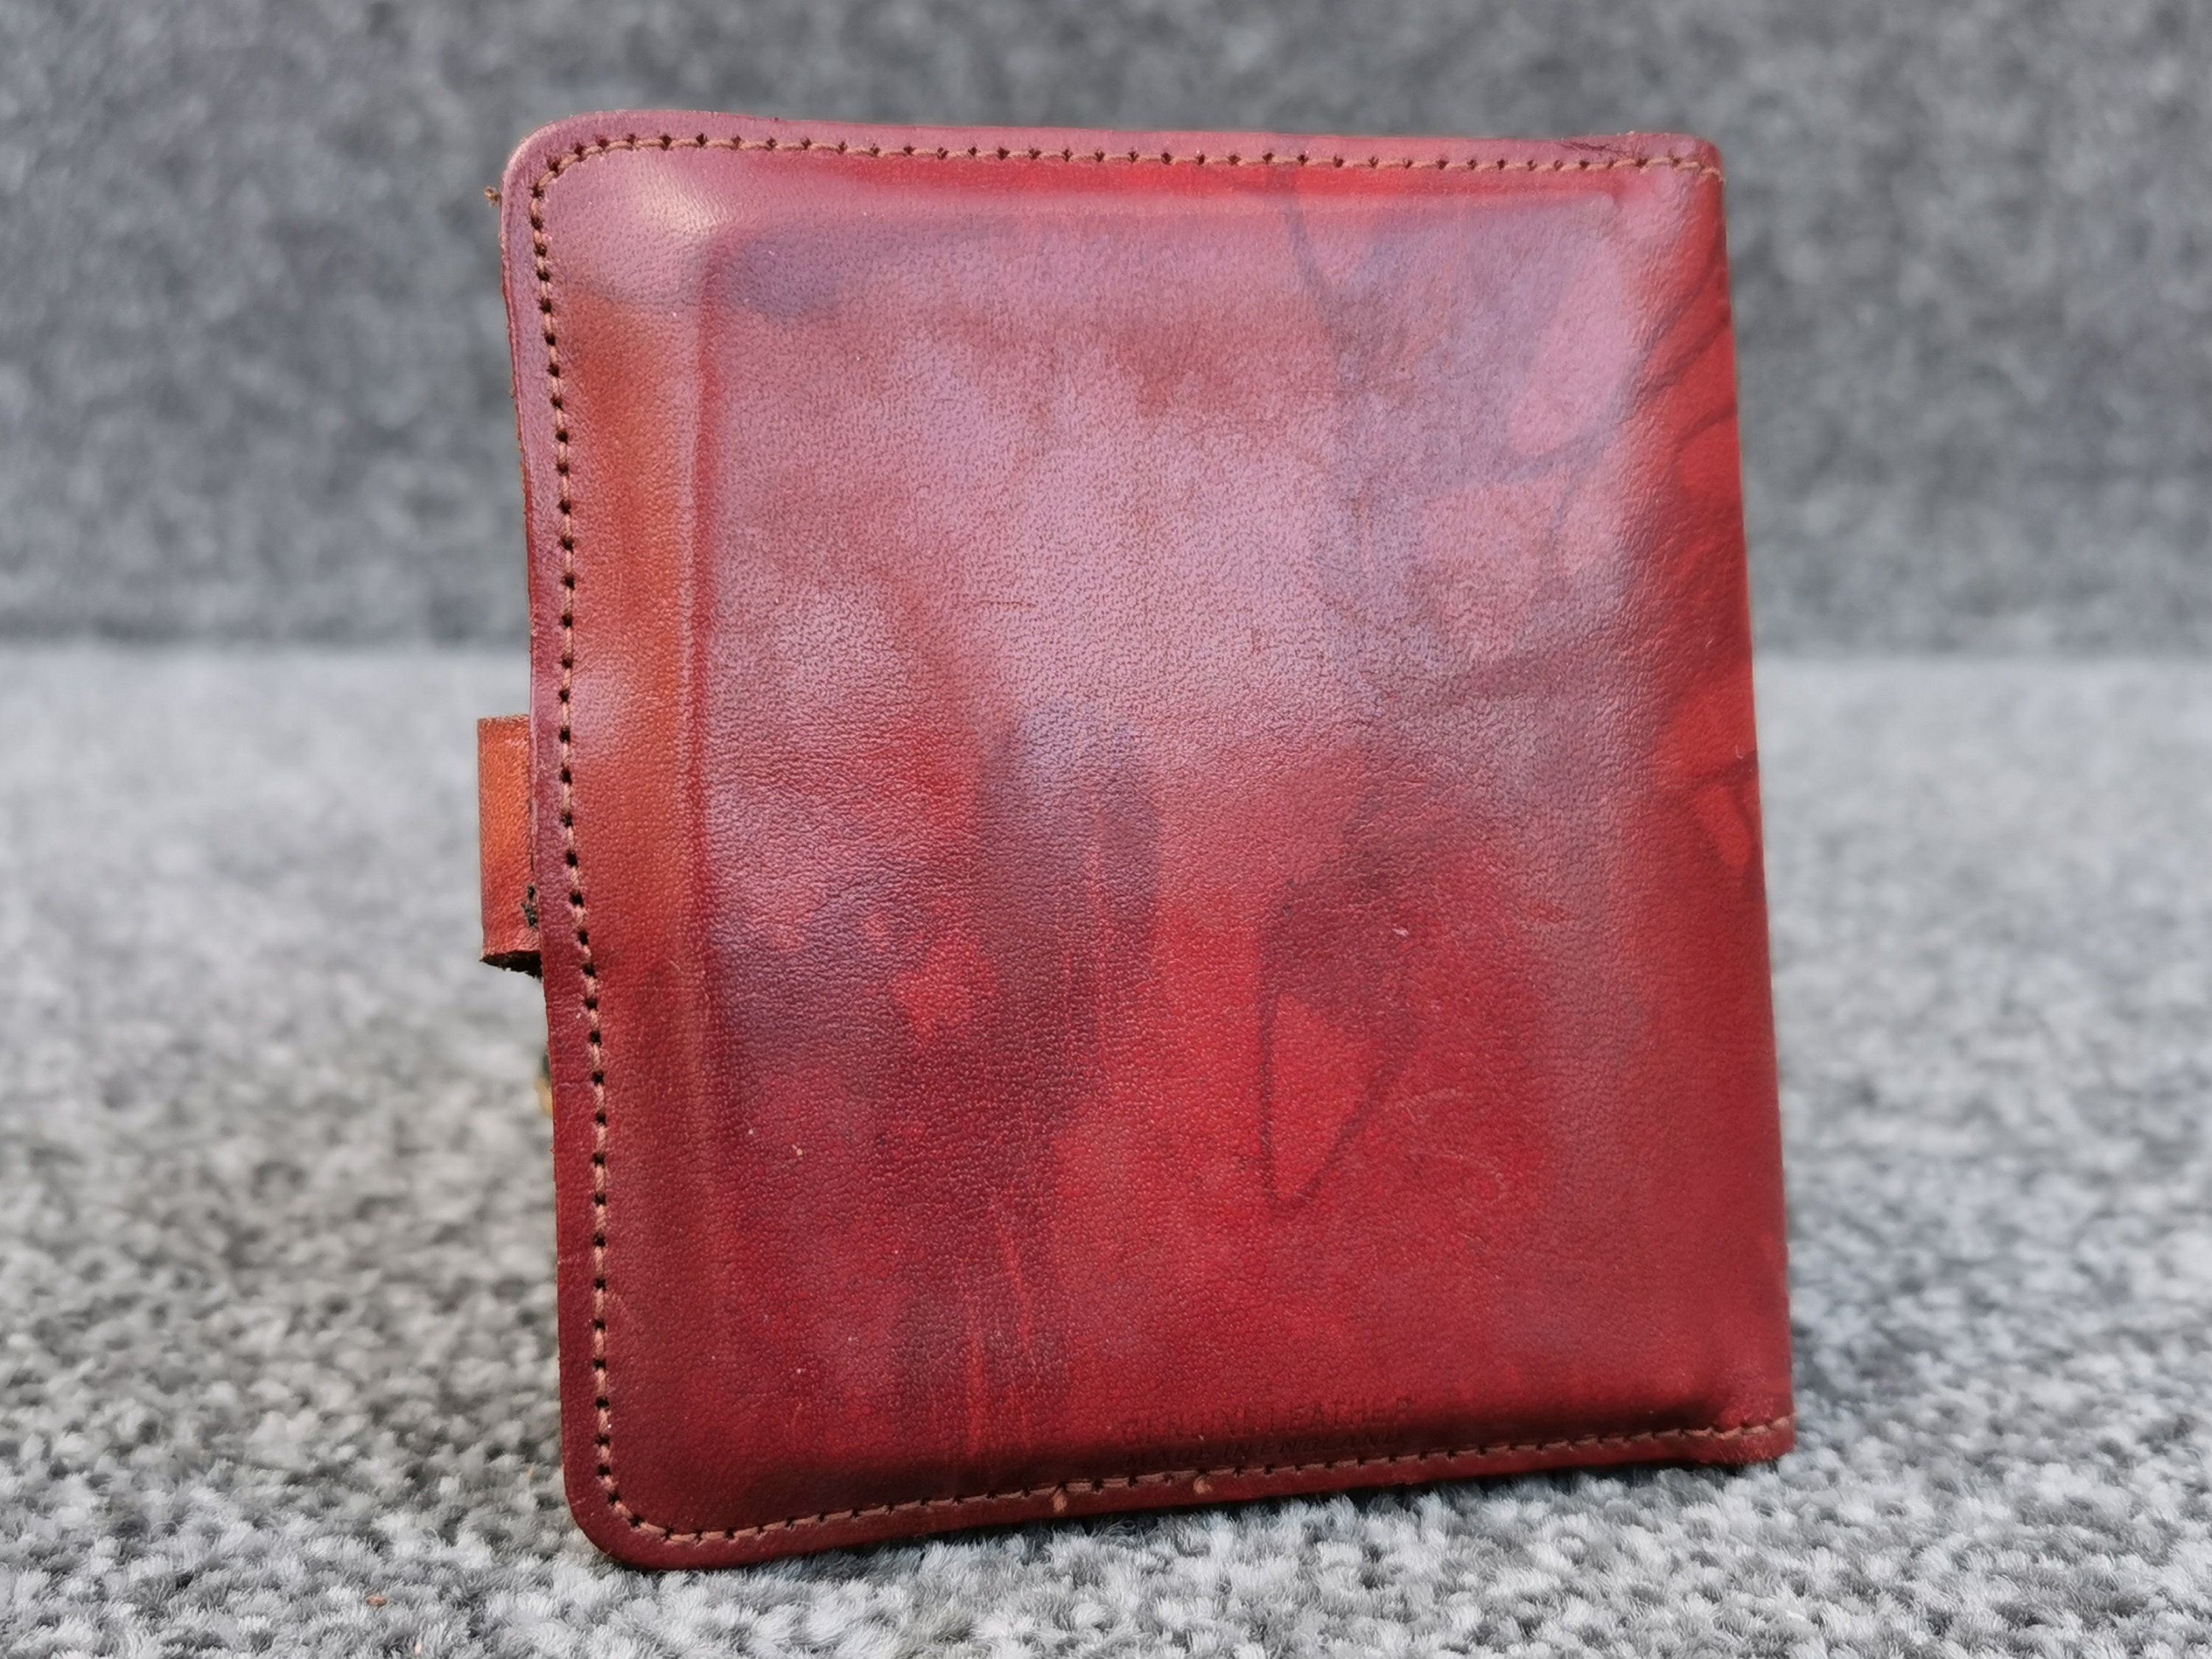 English Leon Jessel Retro Bambi Calf Leather Notecase Wallet Red Art Deco Design, Nice Product